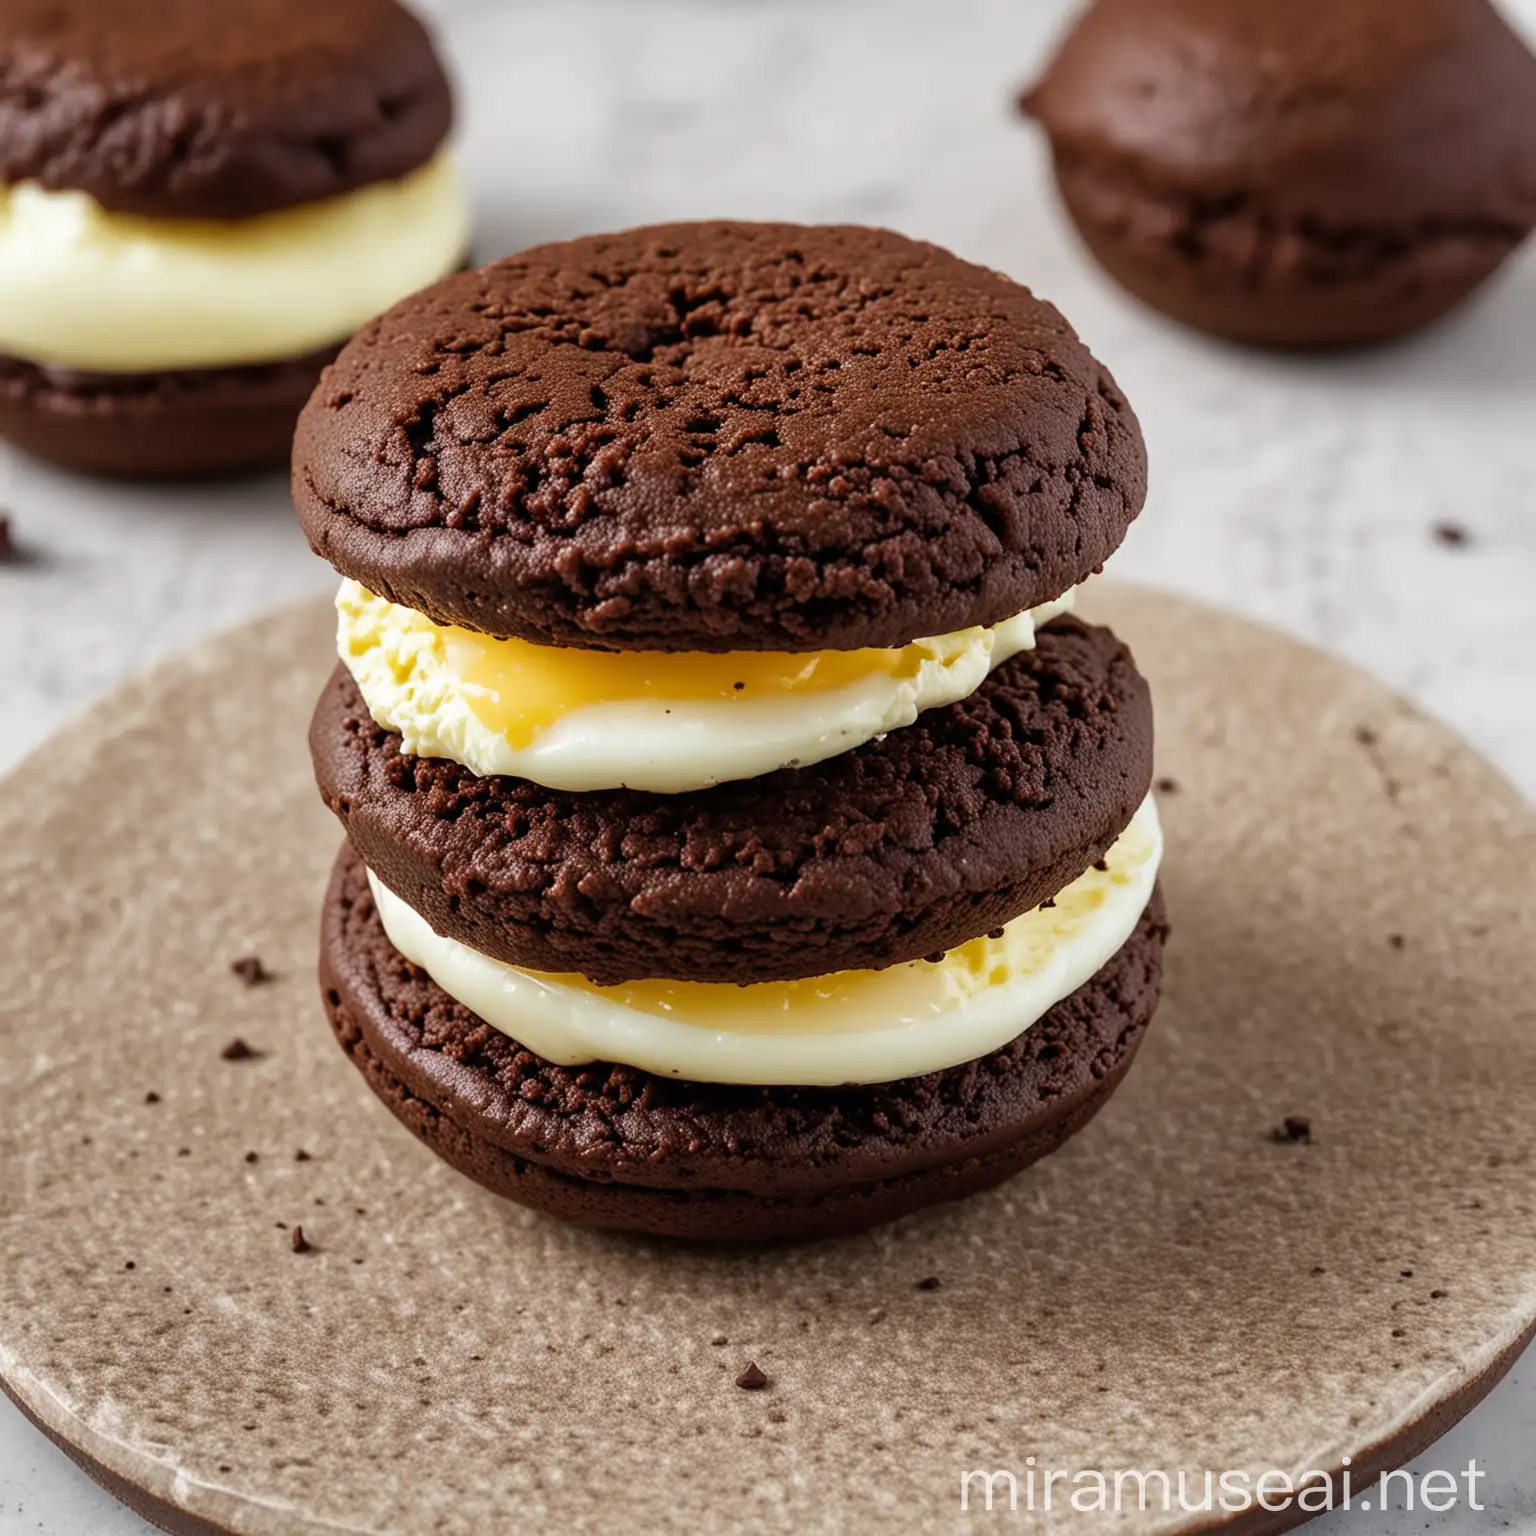 Decadent Chocolate Whoopee Pie with Sandwiched Eggs